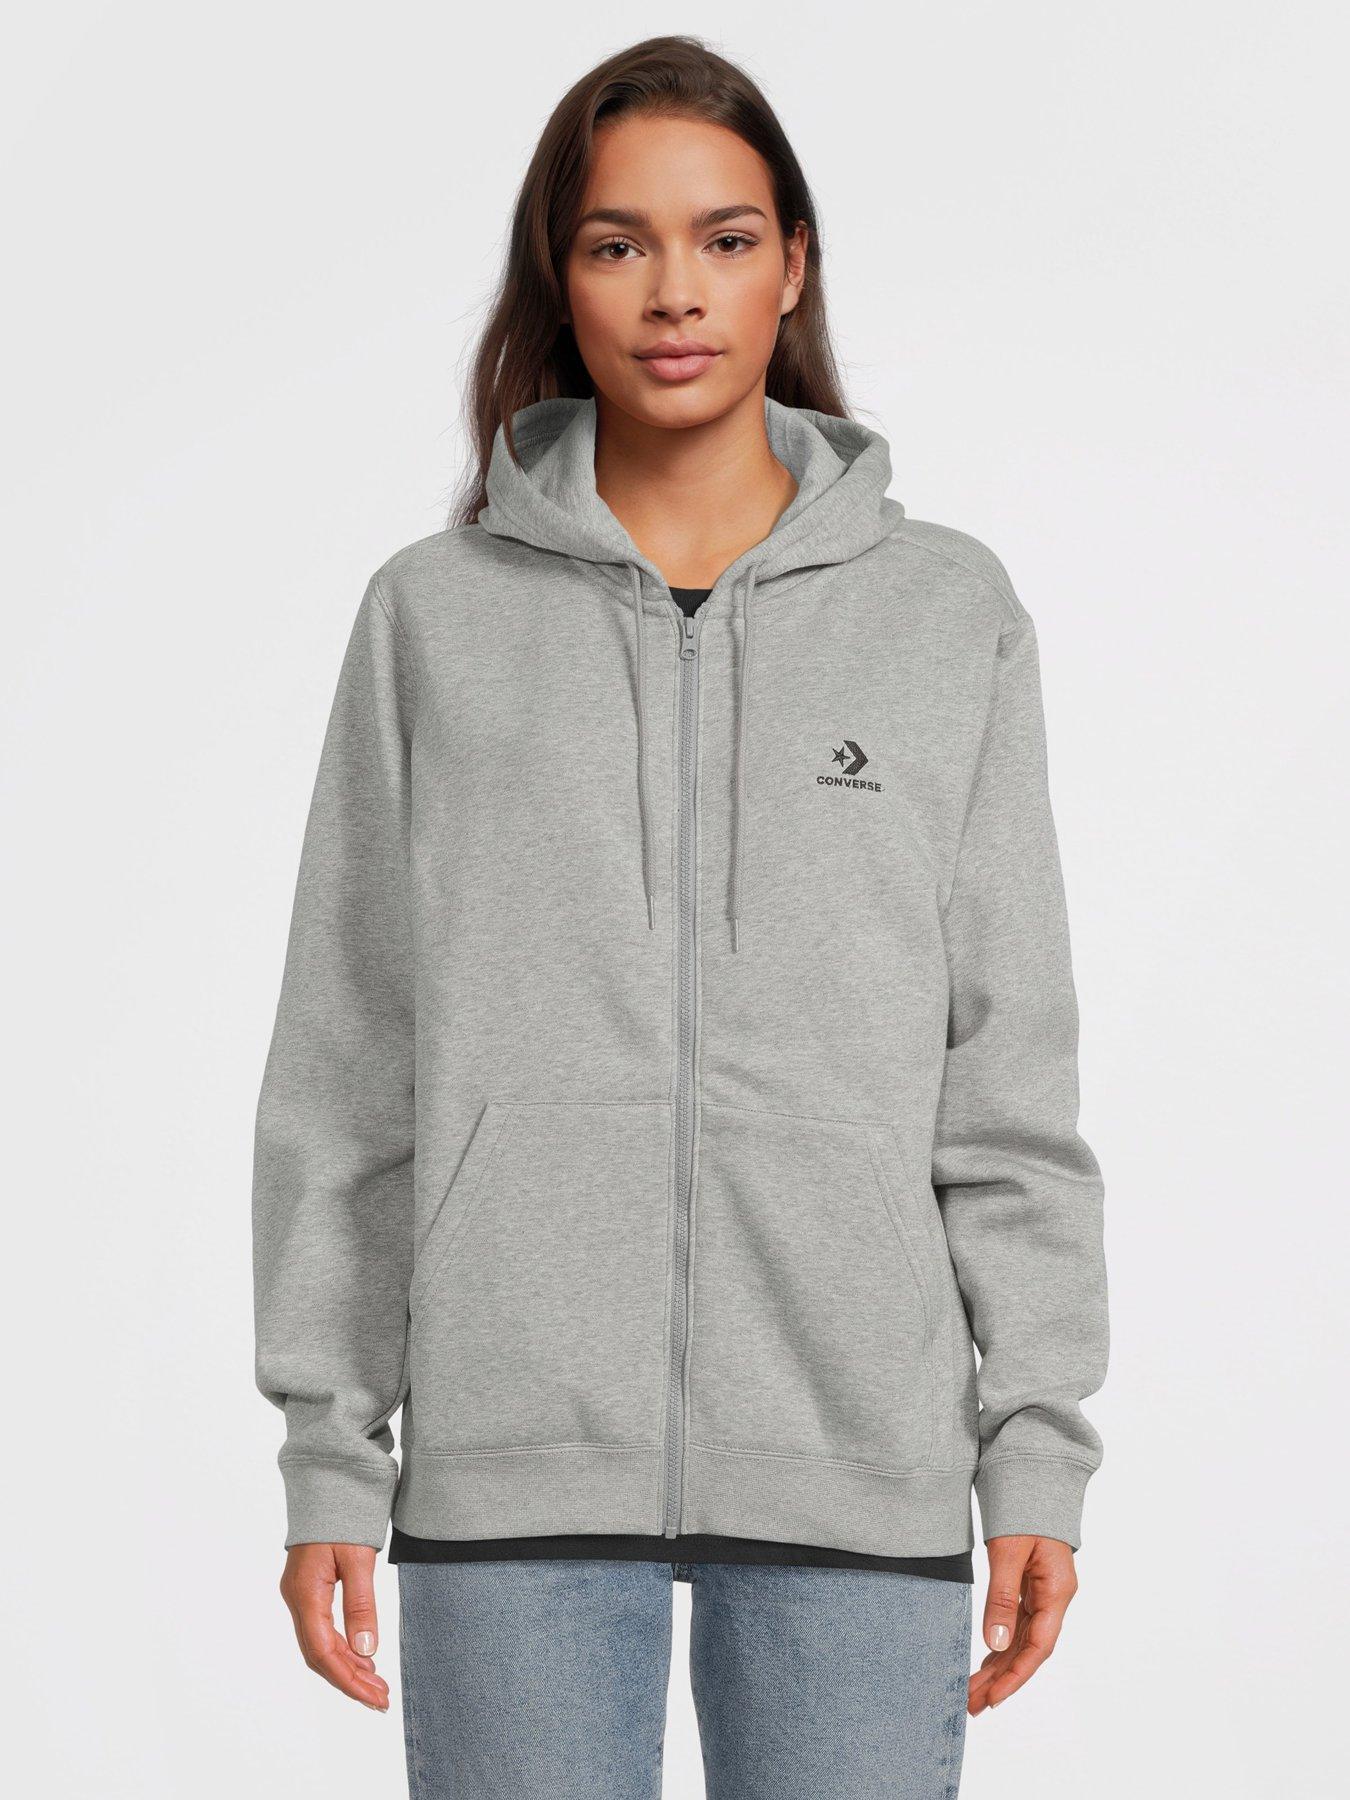 Hoodie Grey Star sales in 2022 Embroidered for Converse Left people Full Chest the Zip Chevron Purchase - - All